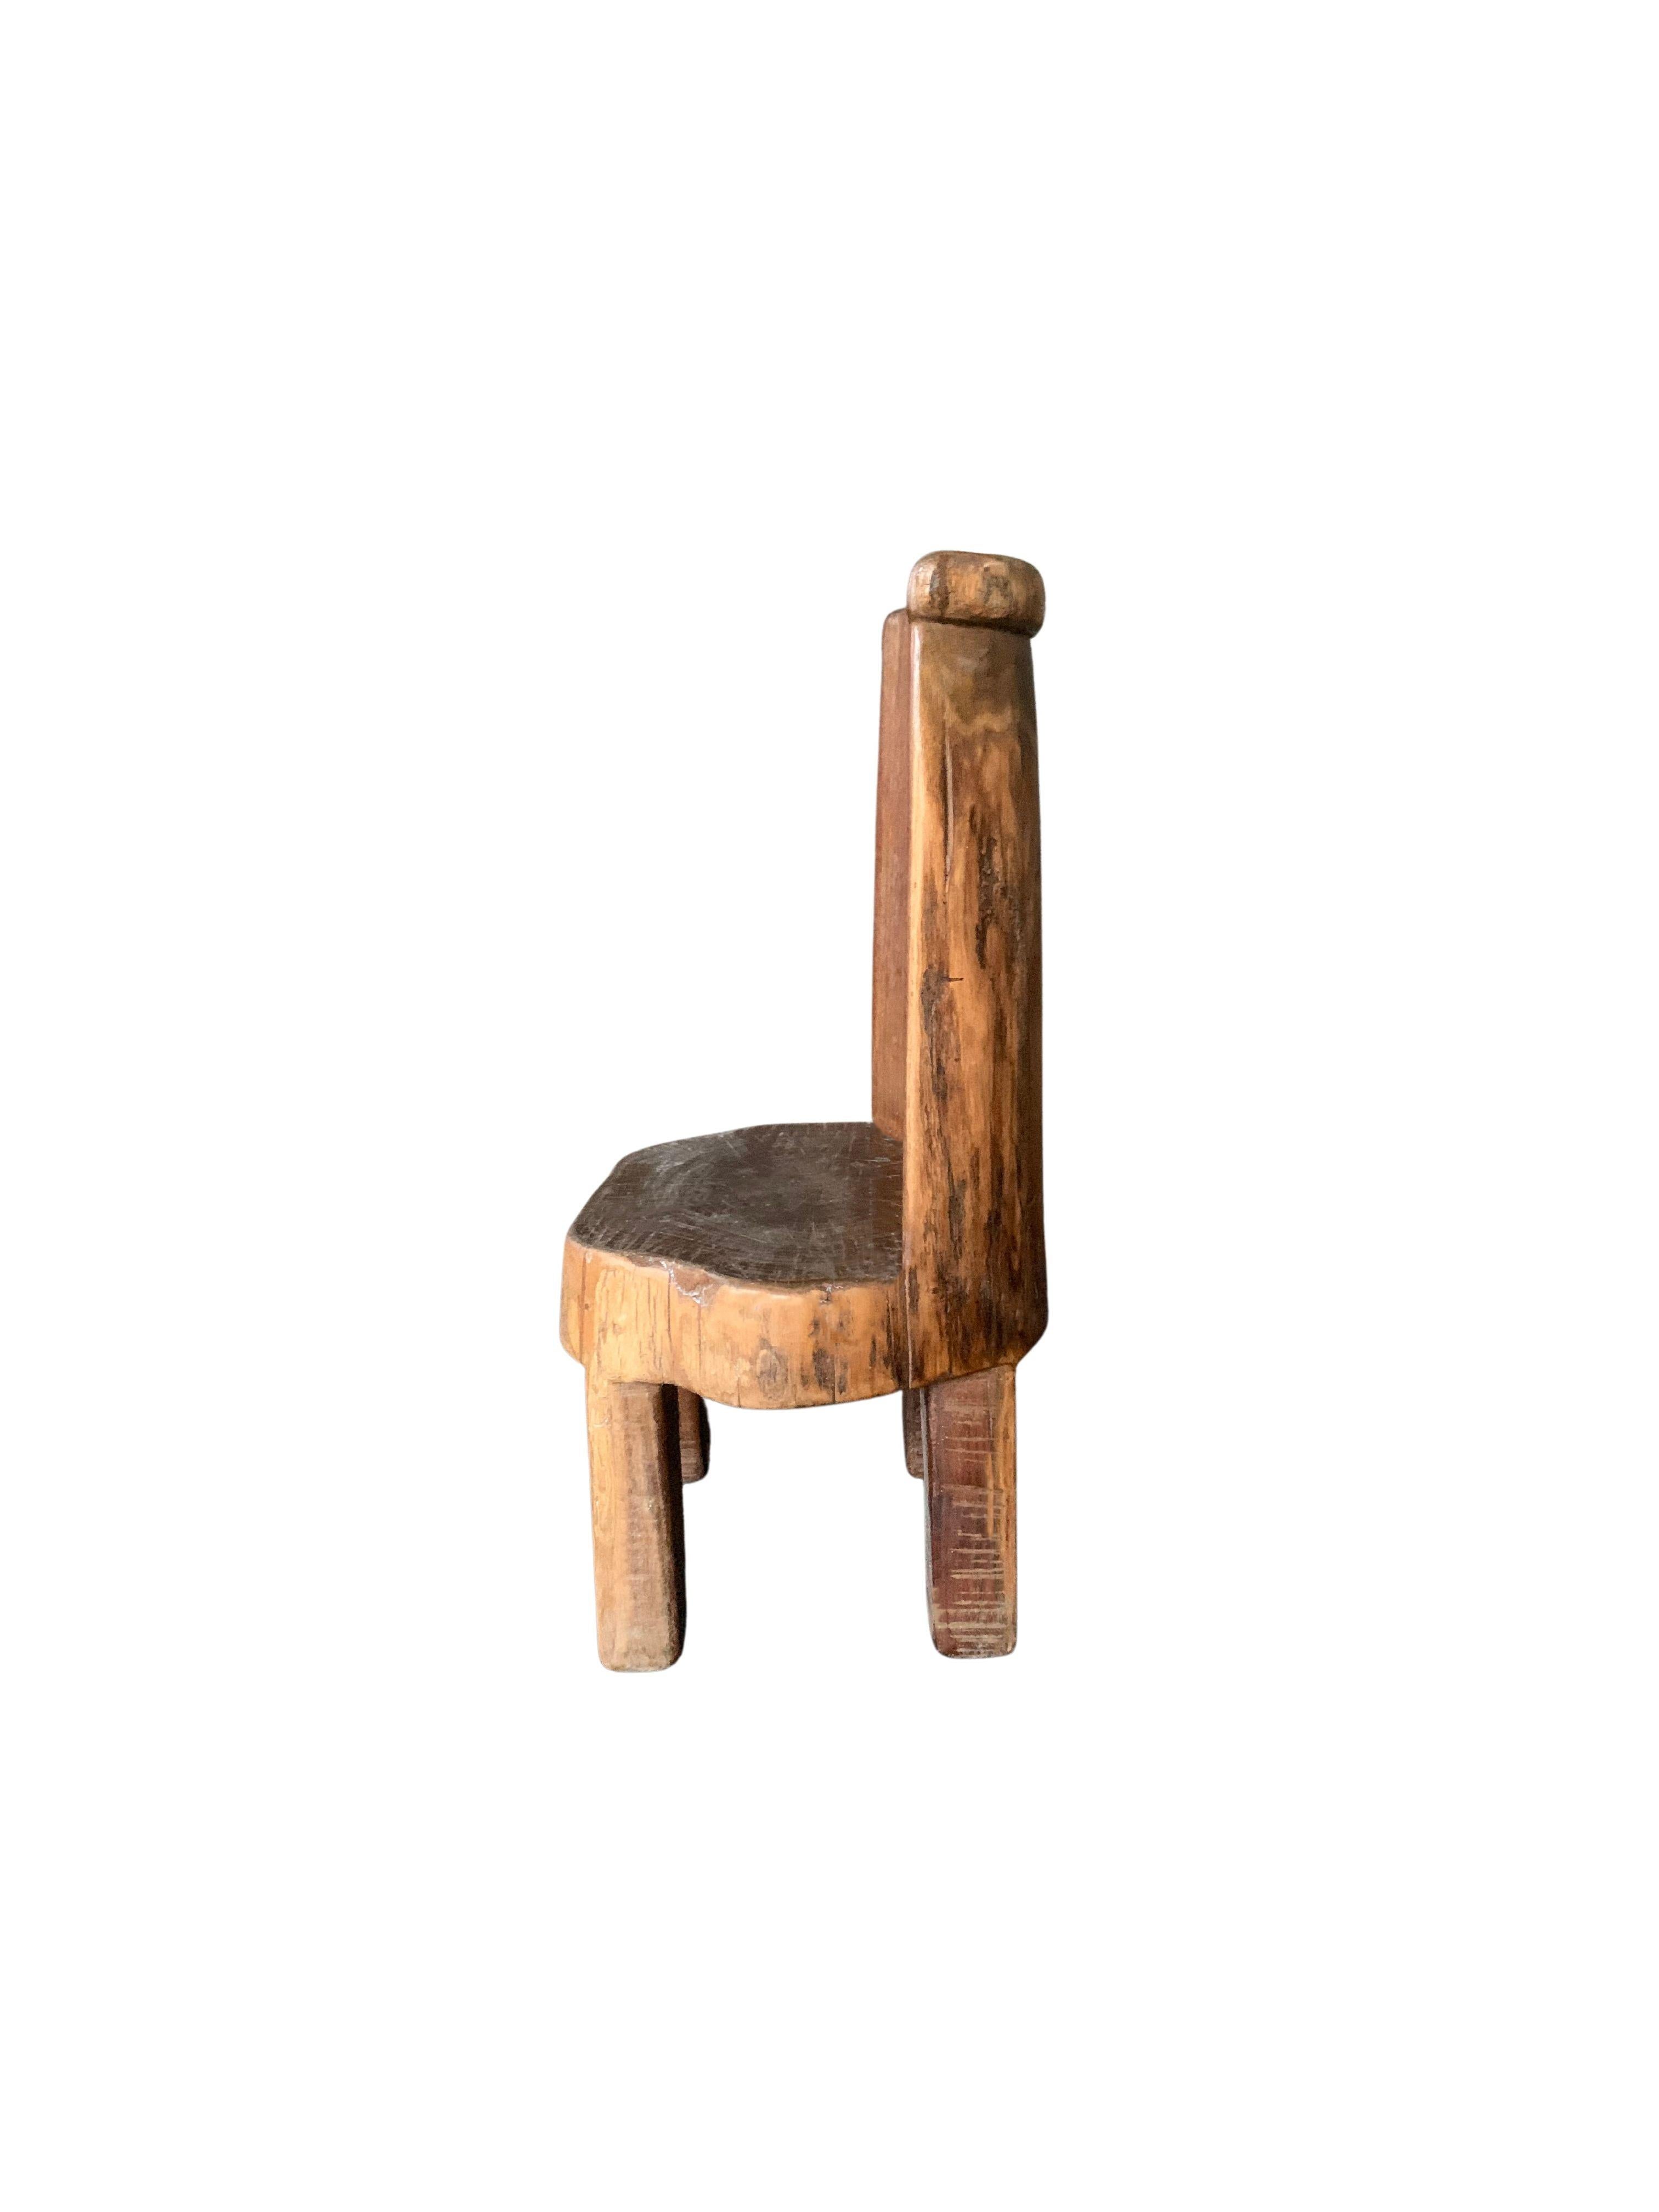 Hand-Crafted Vintage Teak Mini Chair from Madura Island, Indonesia For Sale